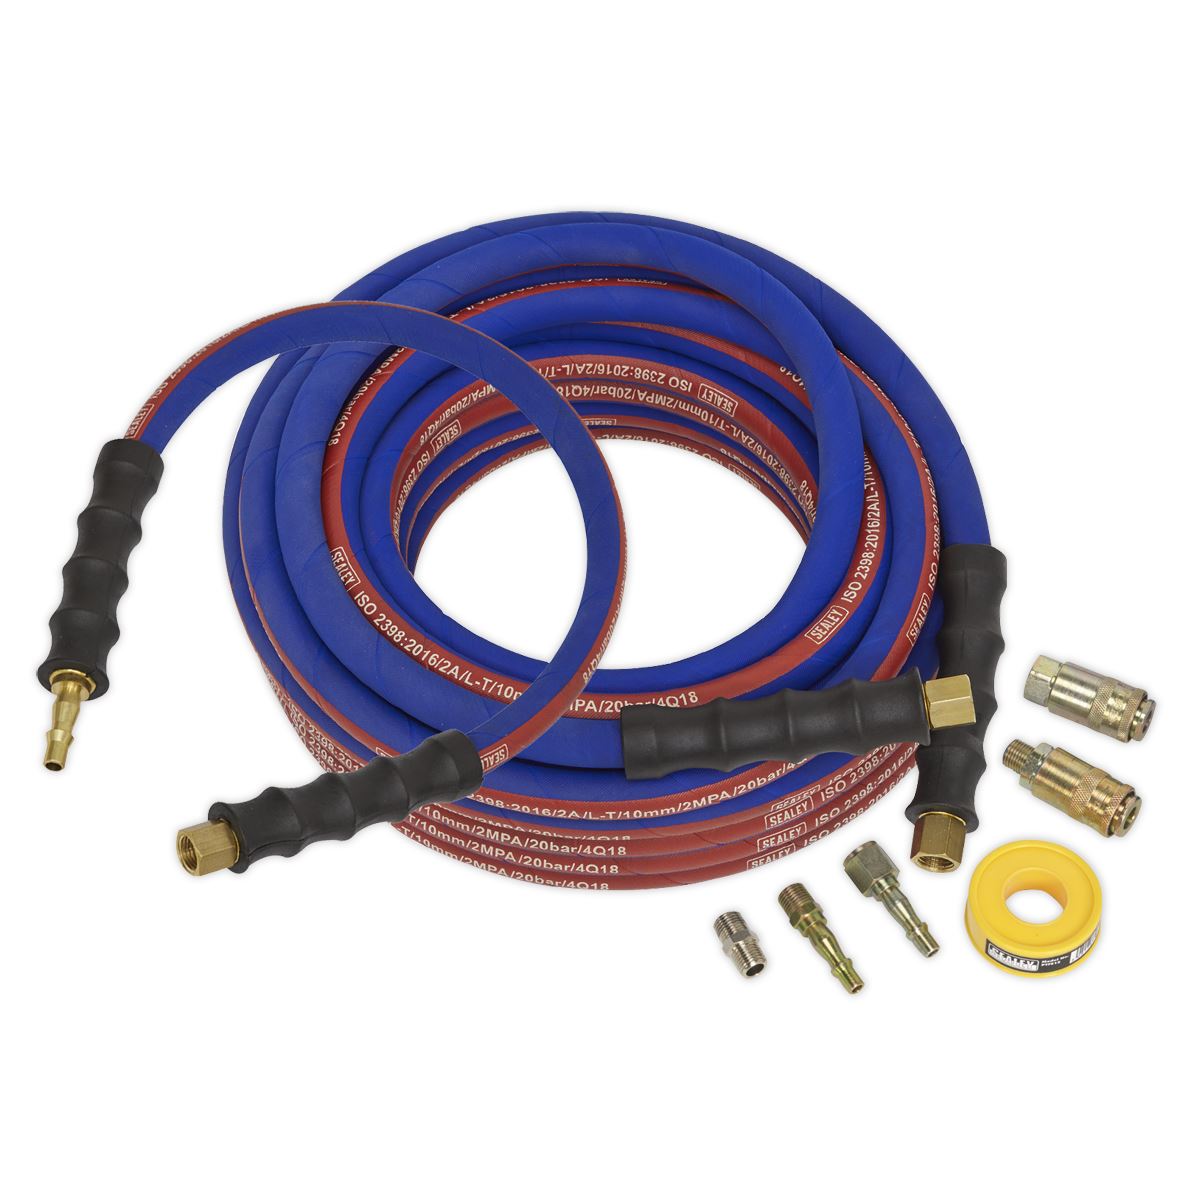 Sealey Air Hose Kit Extra-Heavy-Duty 15m x Ø10mm with Connectors